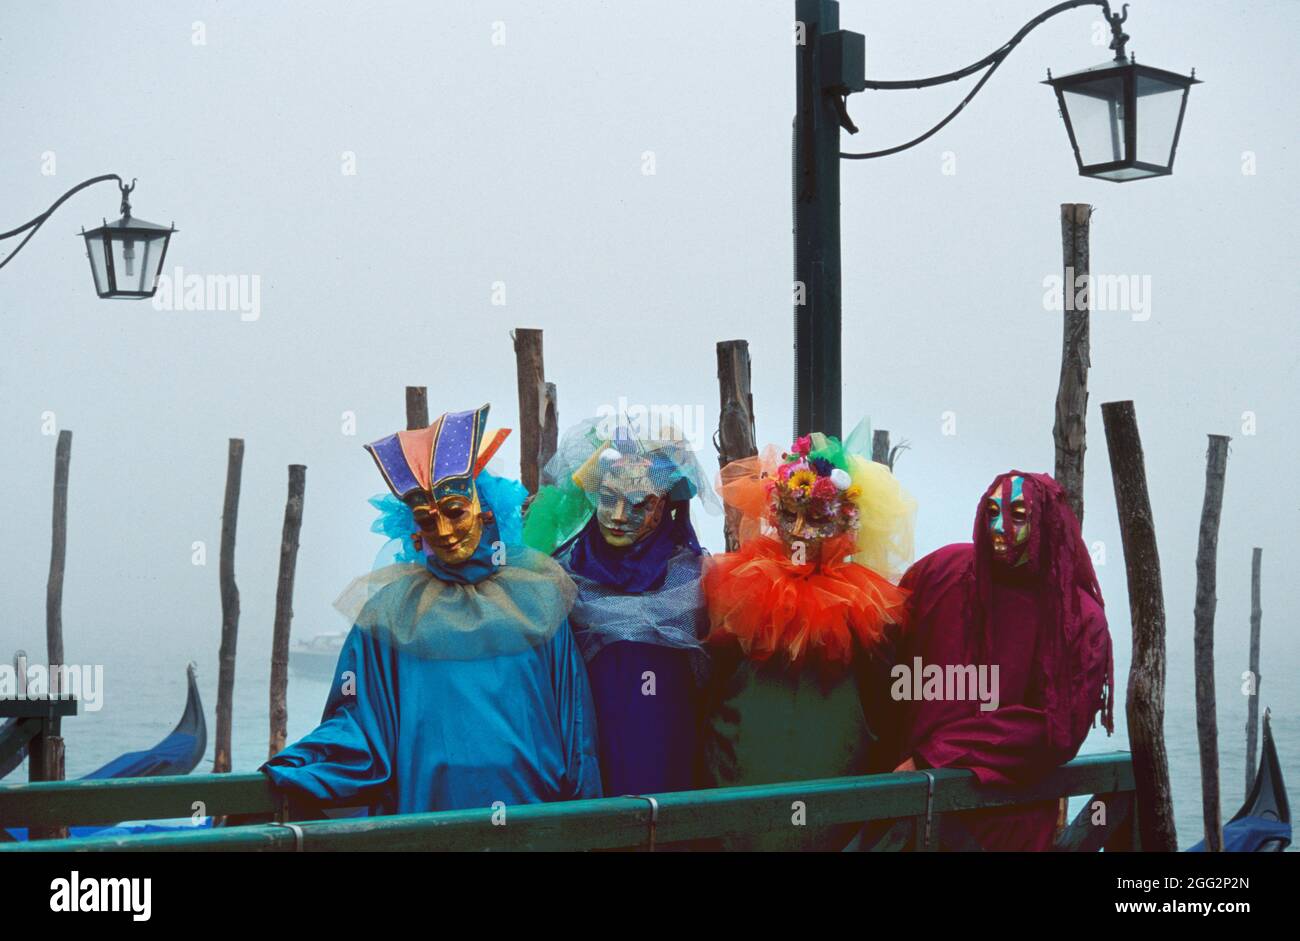 Persons in costumes pose on the Venice berth Near Piazza San Marco Stock Photo